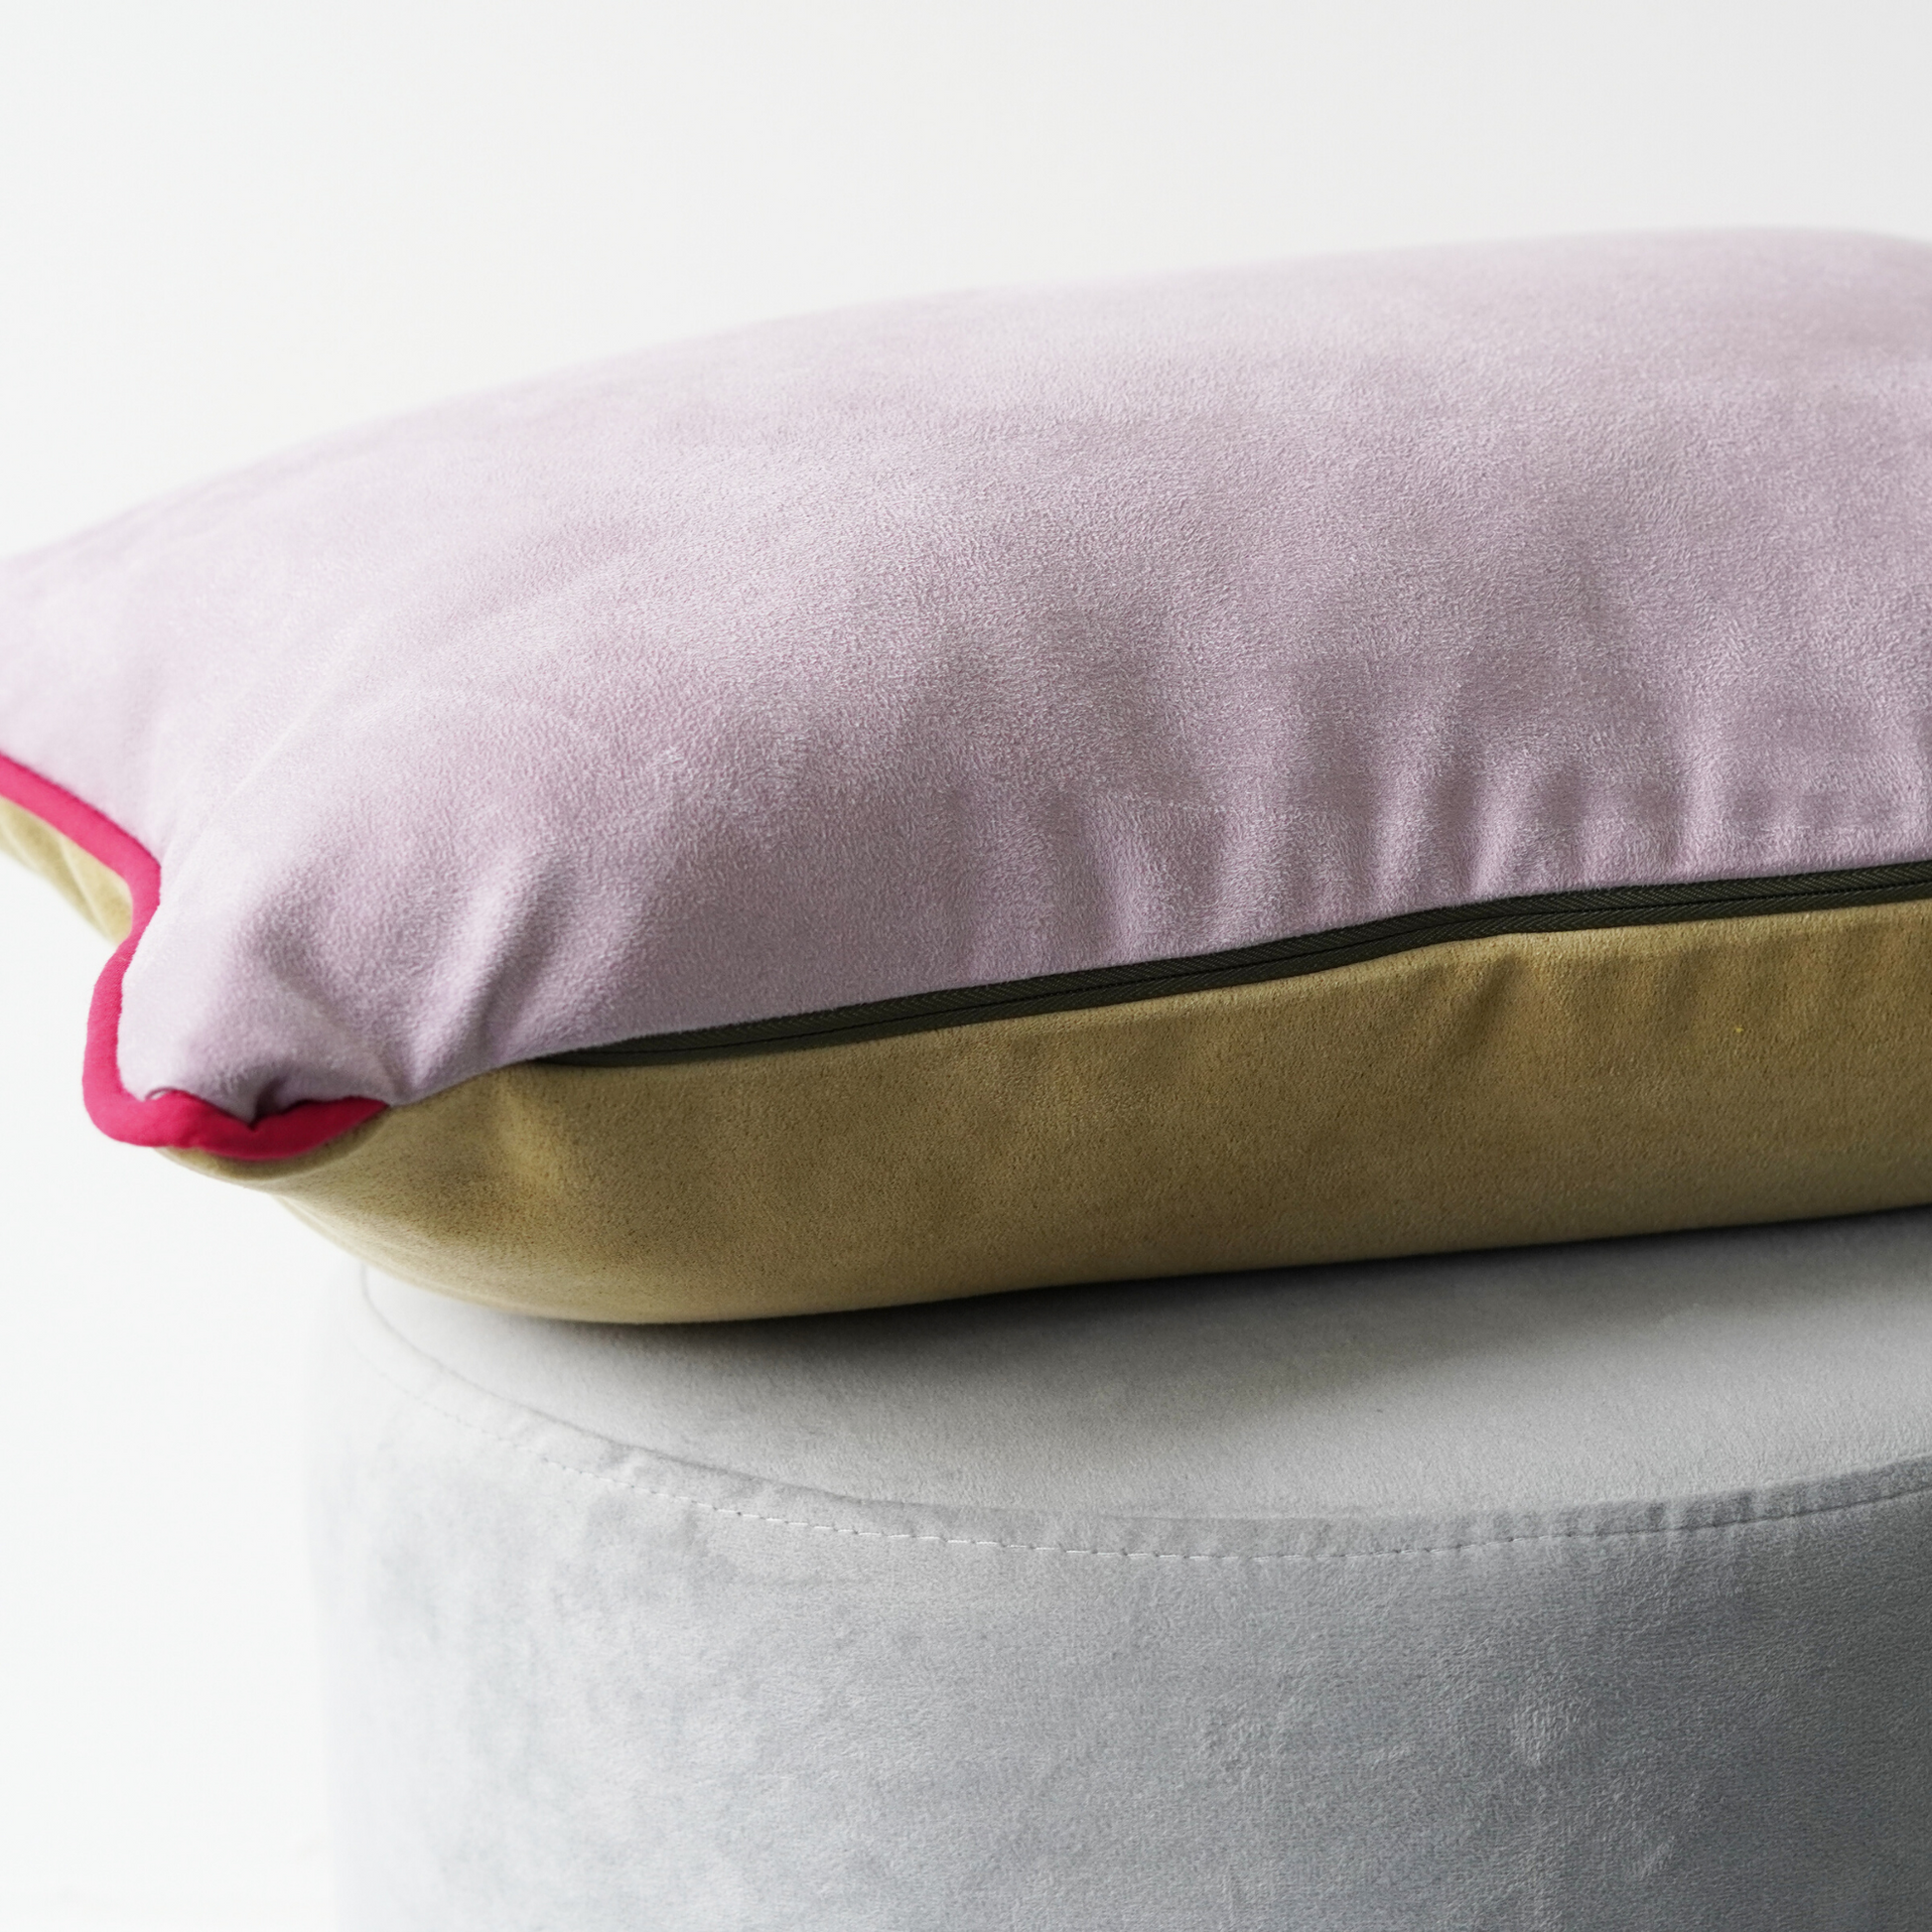 Yellow and lilac suede look rectangle cushion with contrast fuchsia piping and khaki zip. Close up view of cushion laying flat to show features.